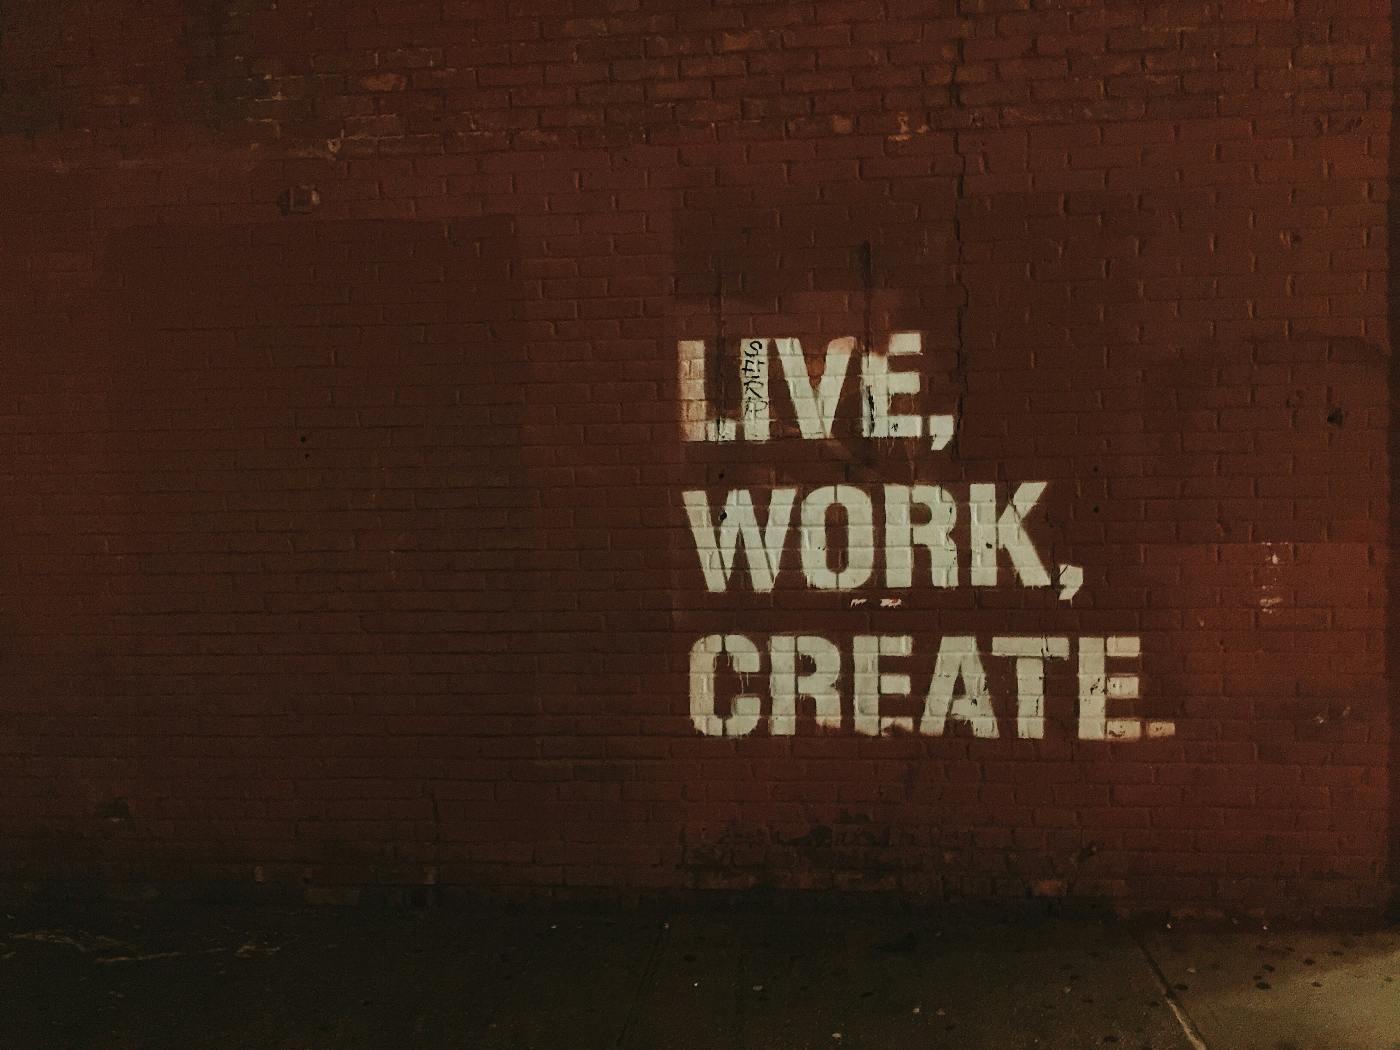 A brick wall with Live, Work, Create painted on it